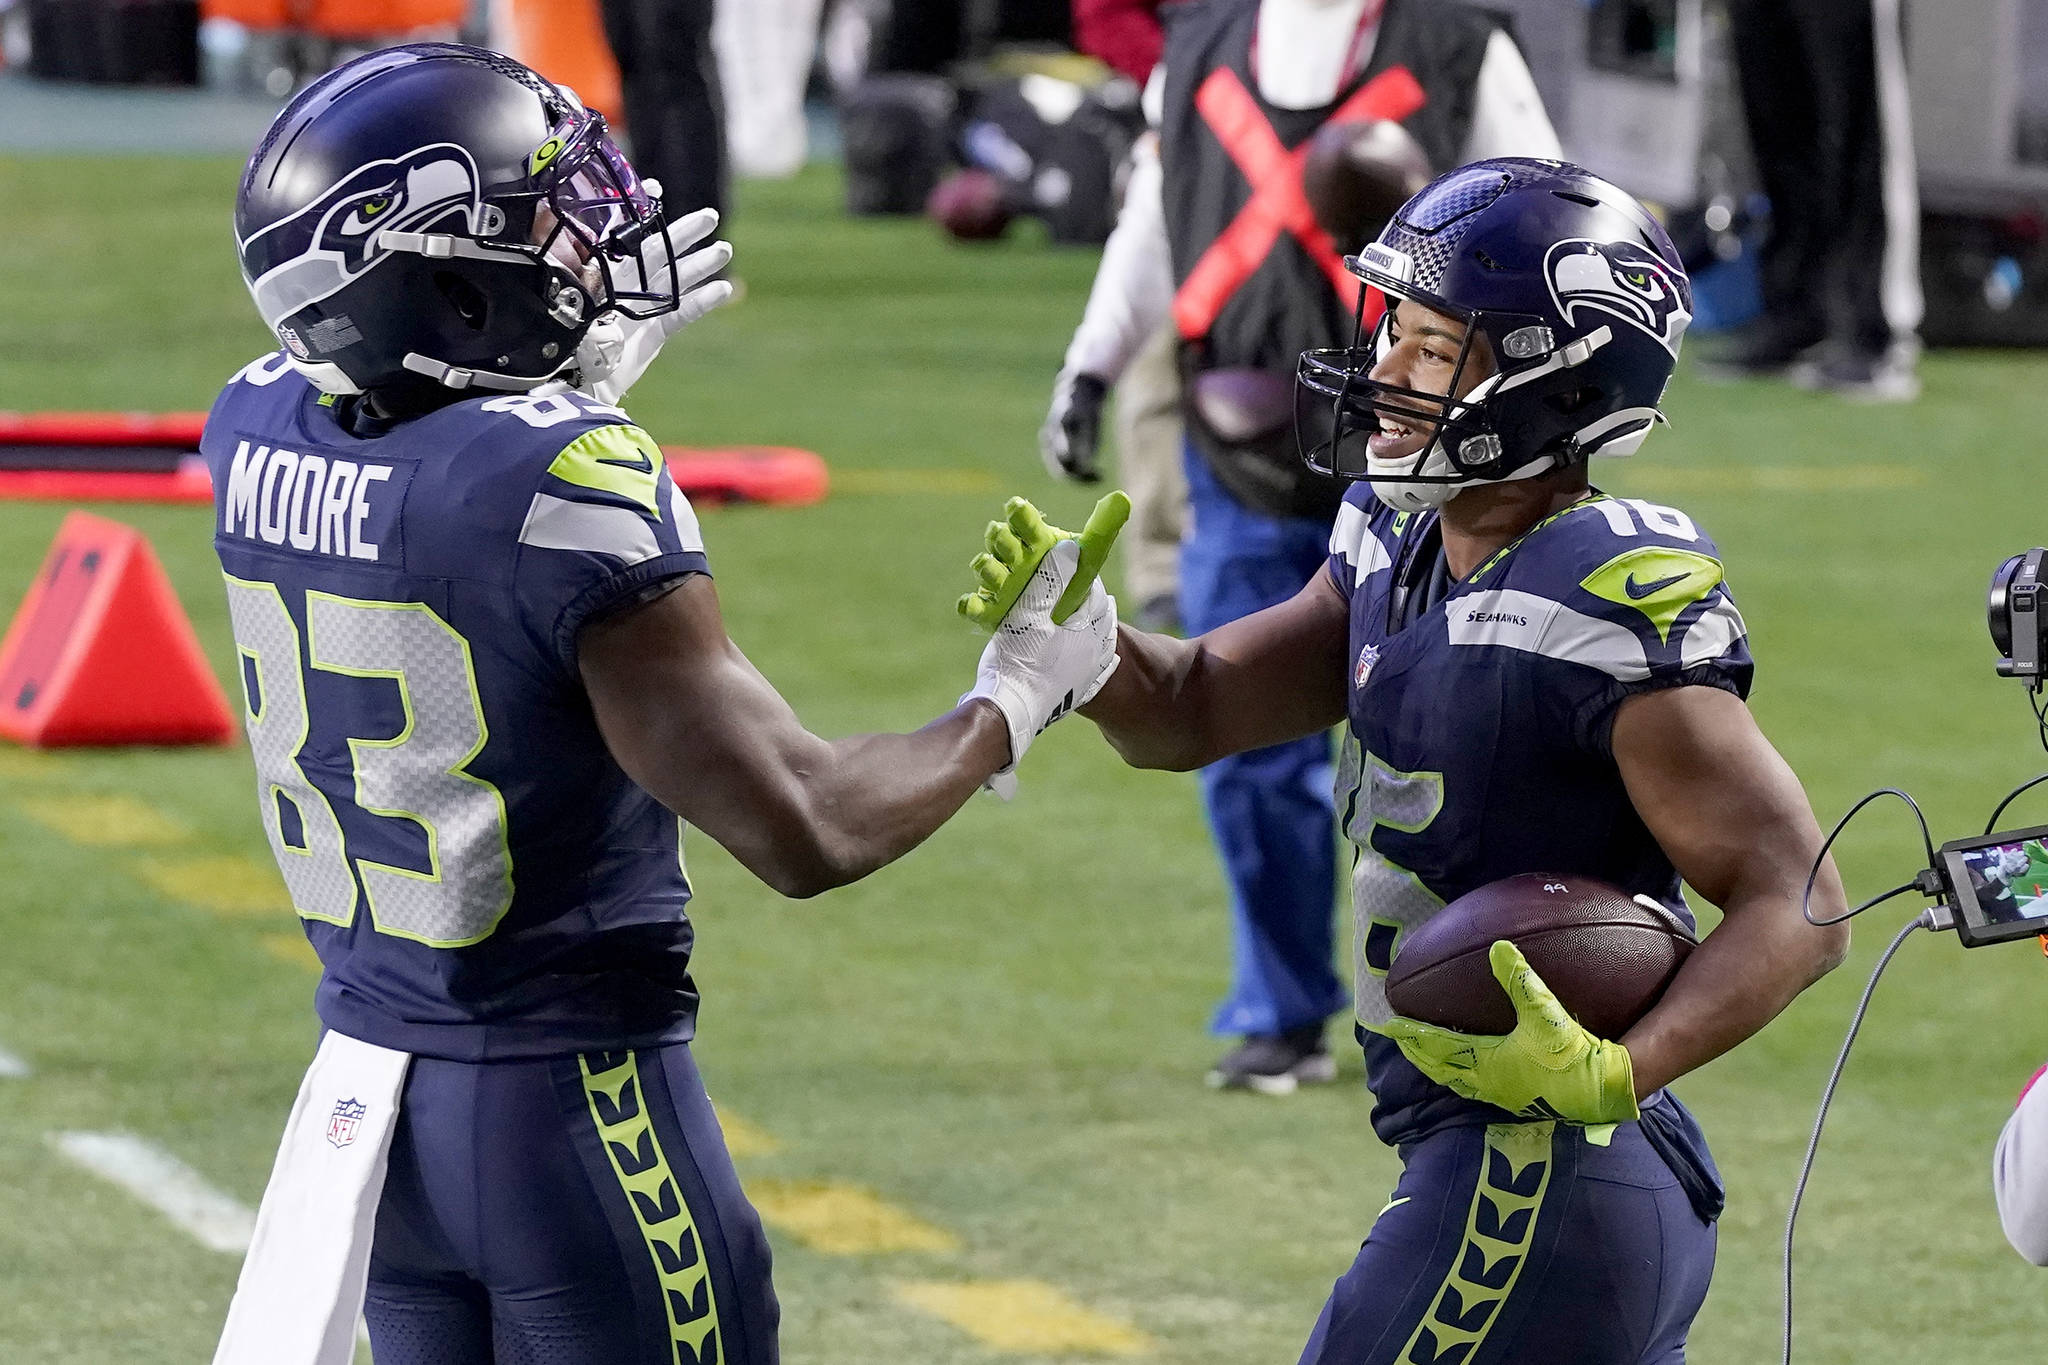 Seattle Seahawks wide receiver Tyler Lockett (16) celebrates with David Moore (83) following Lockett’s fourth-quarter touchdown against the San Francisco 49ers Sunday in Glendale, Ariz. (AP Photo/Ross D. Franklin)